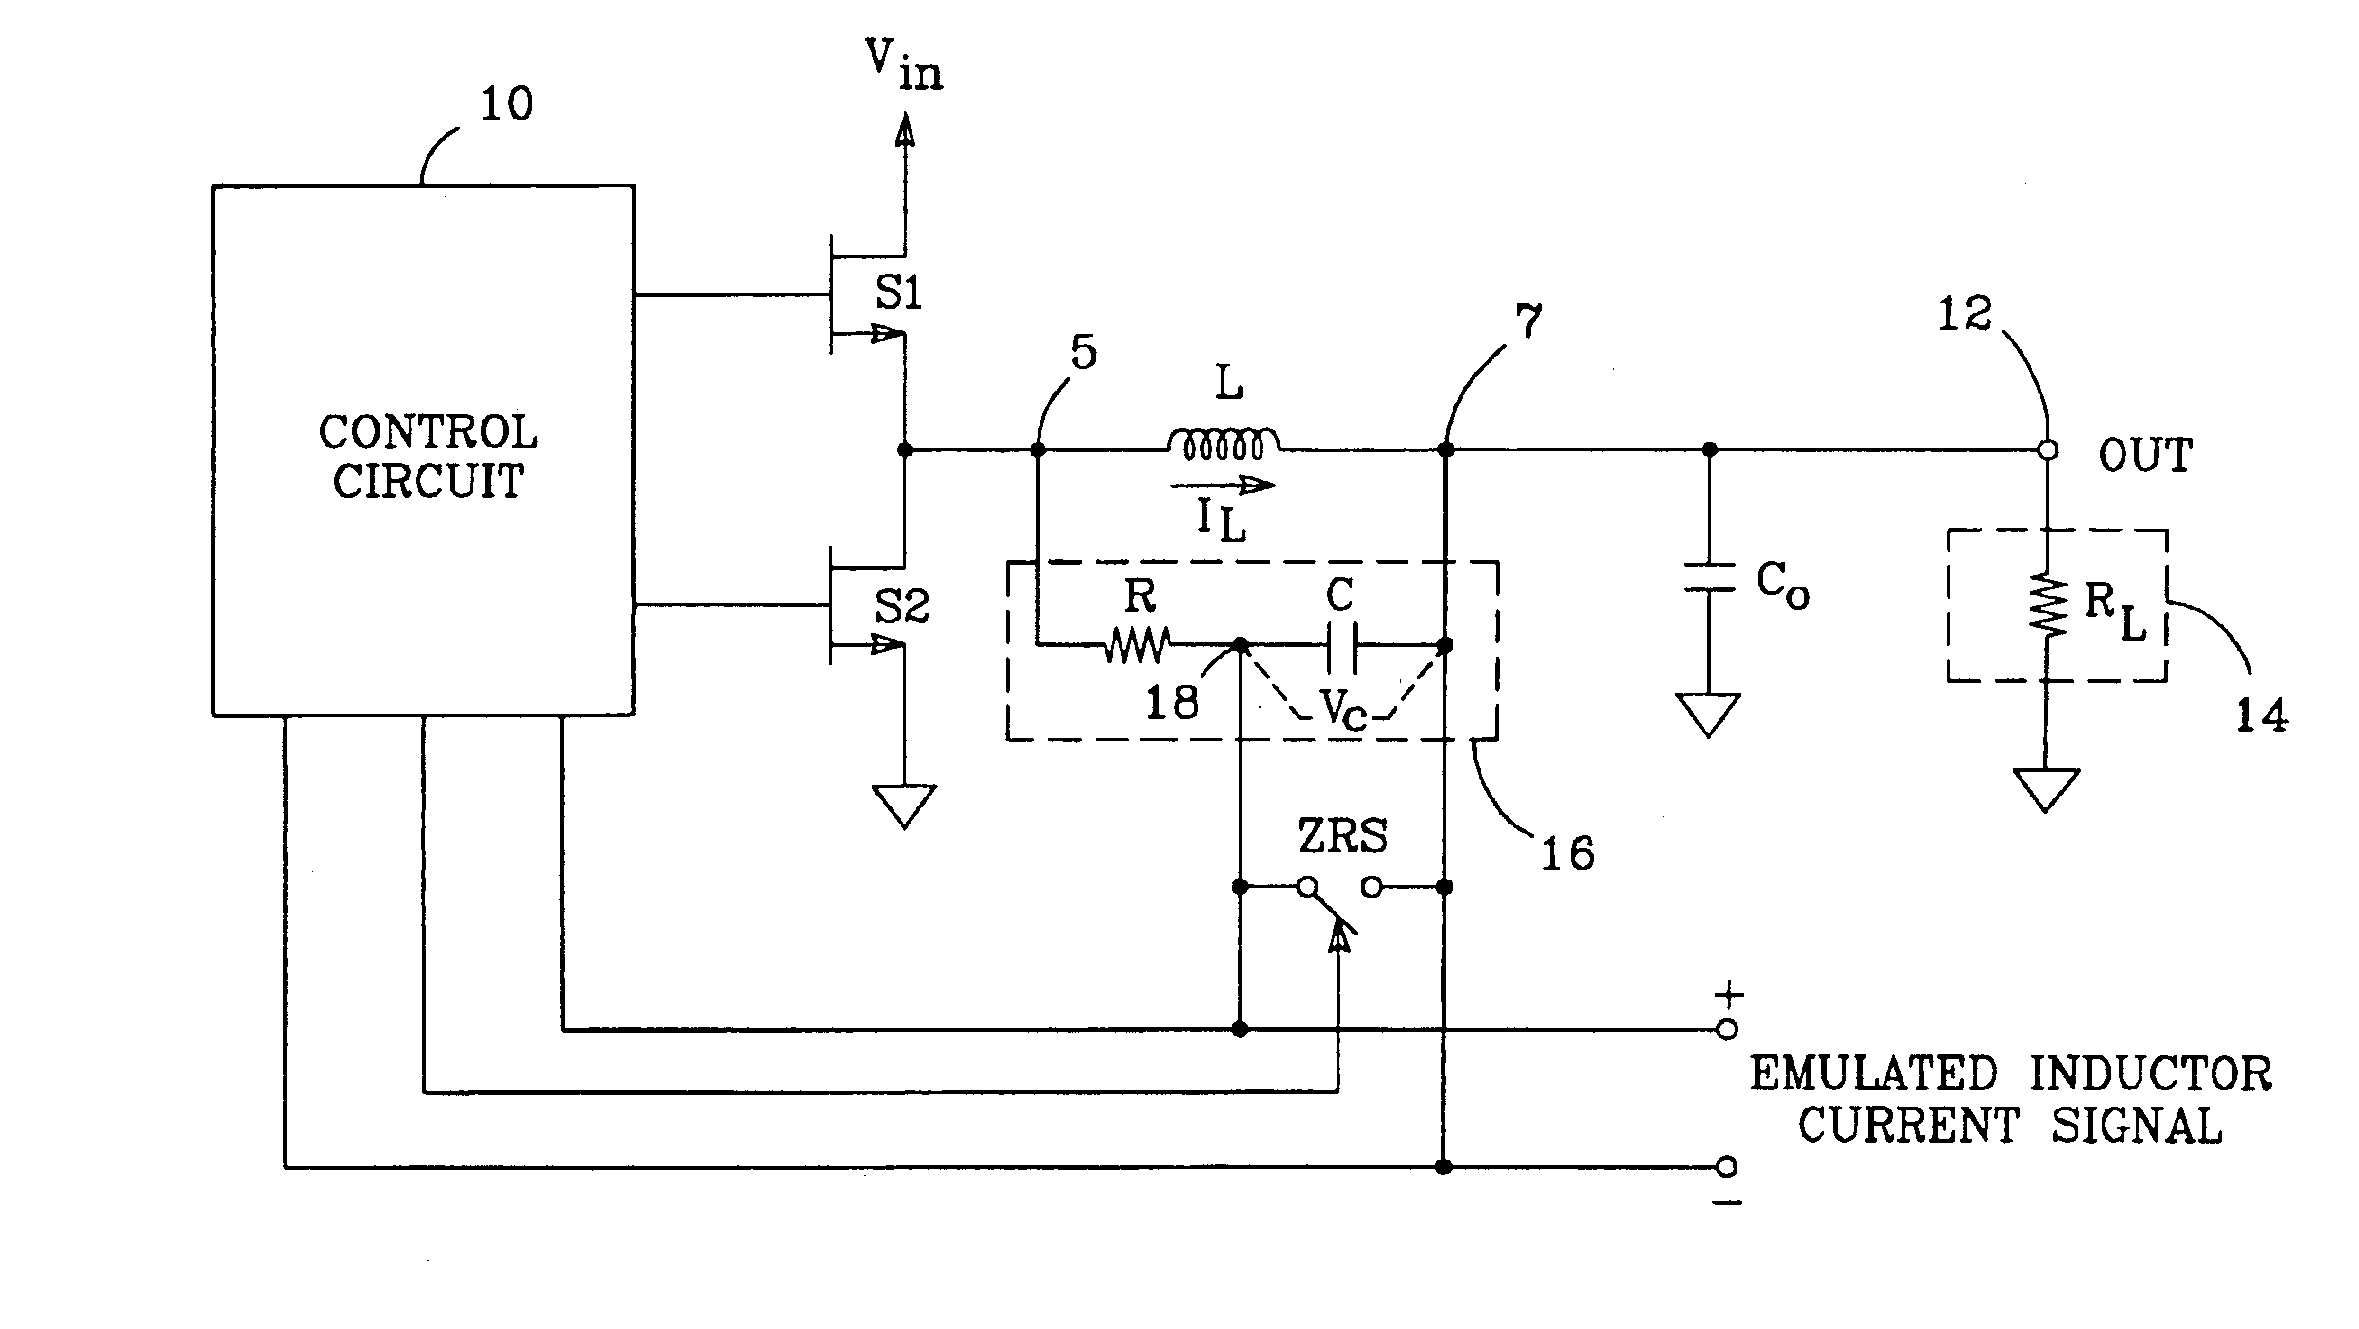 Inductor current emulation circuit for switching power supply